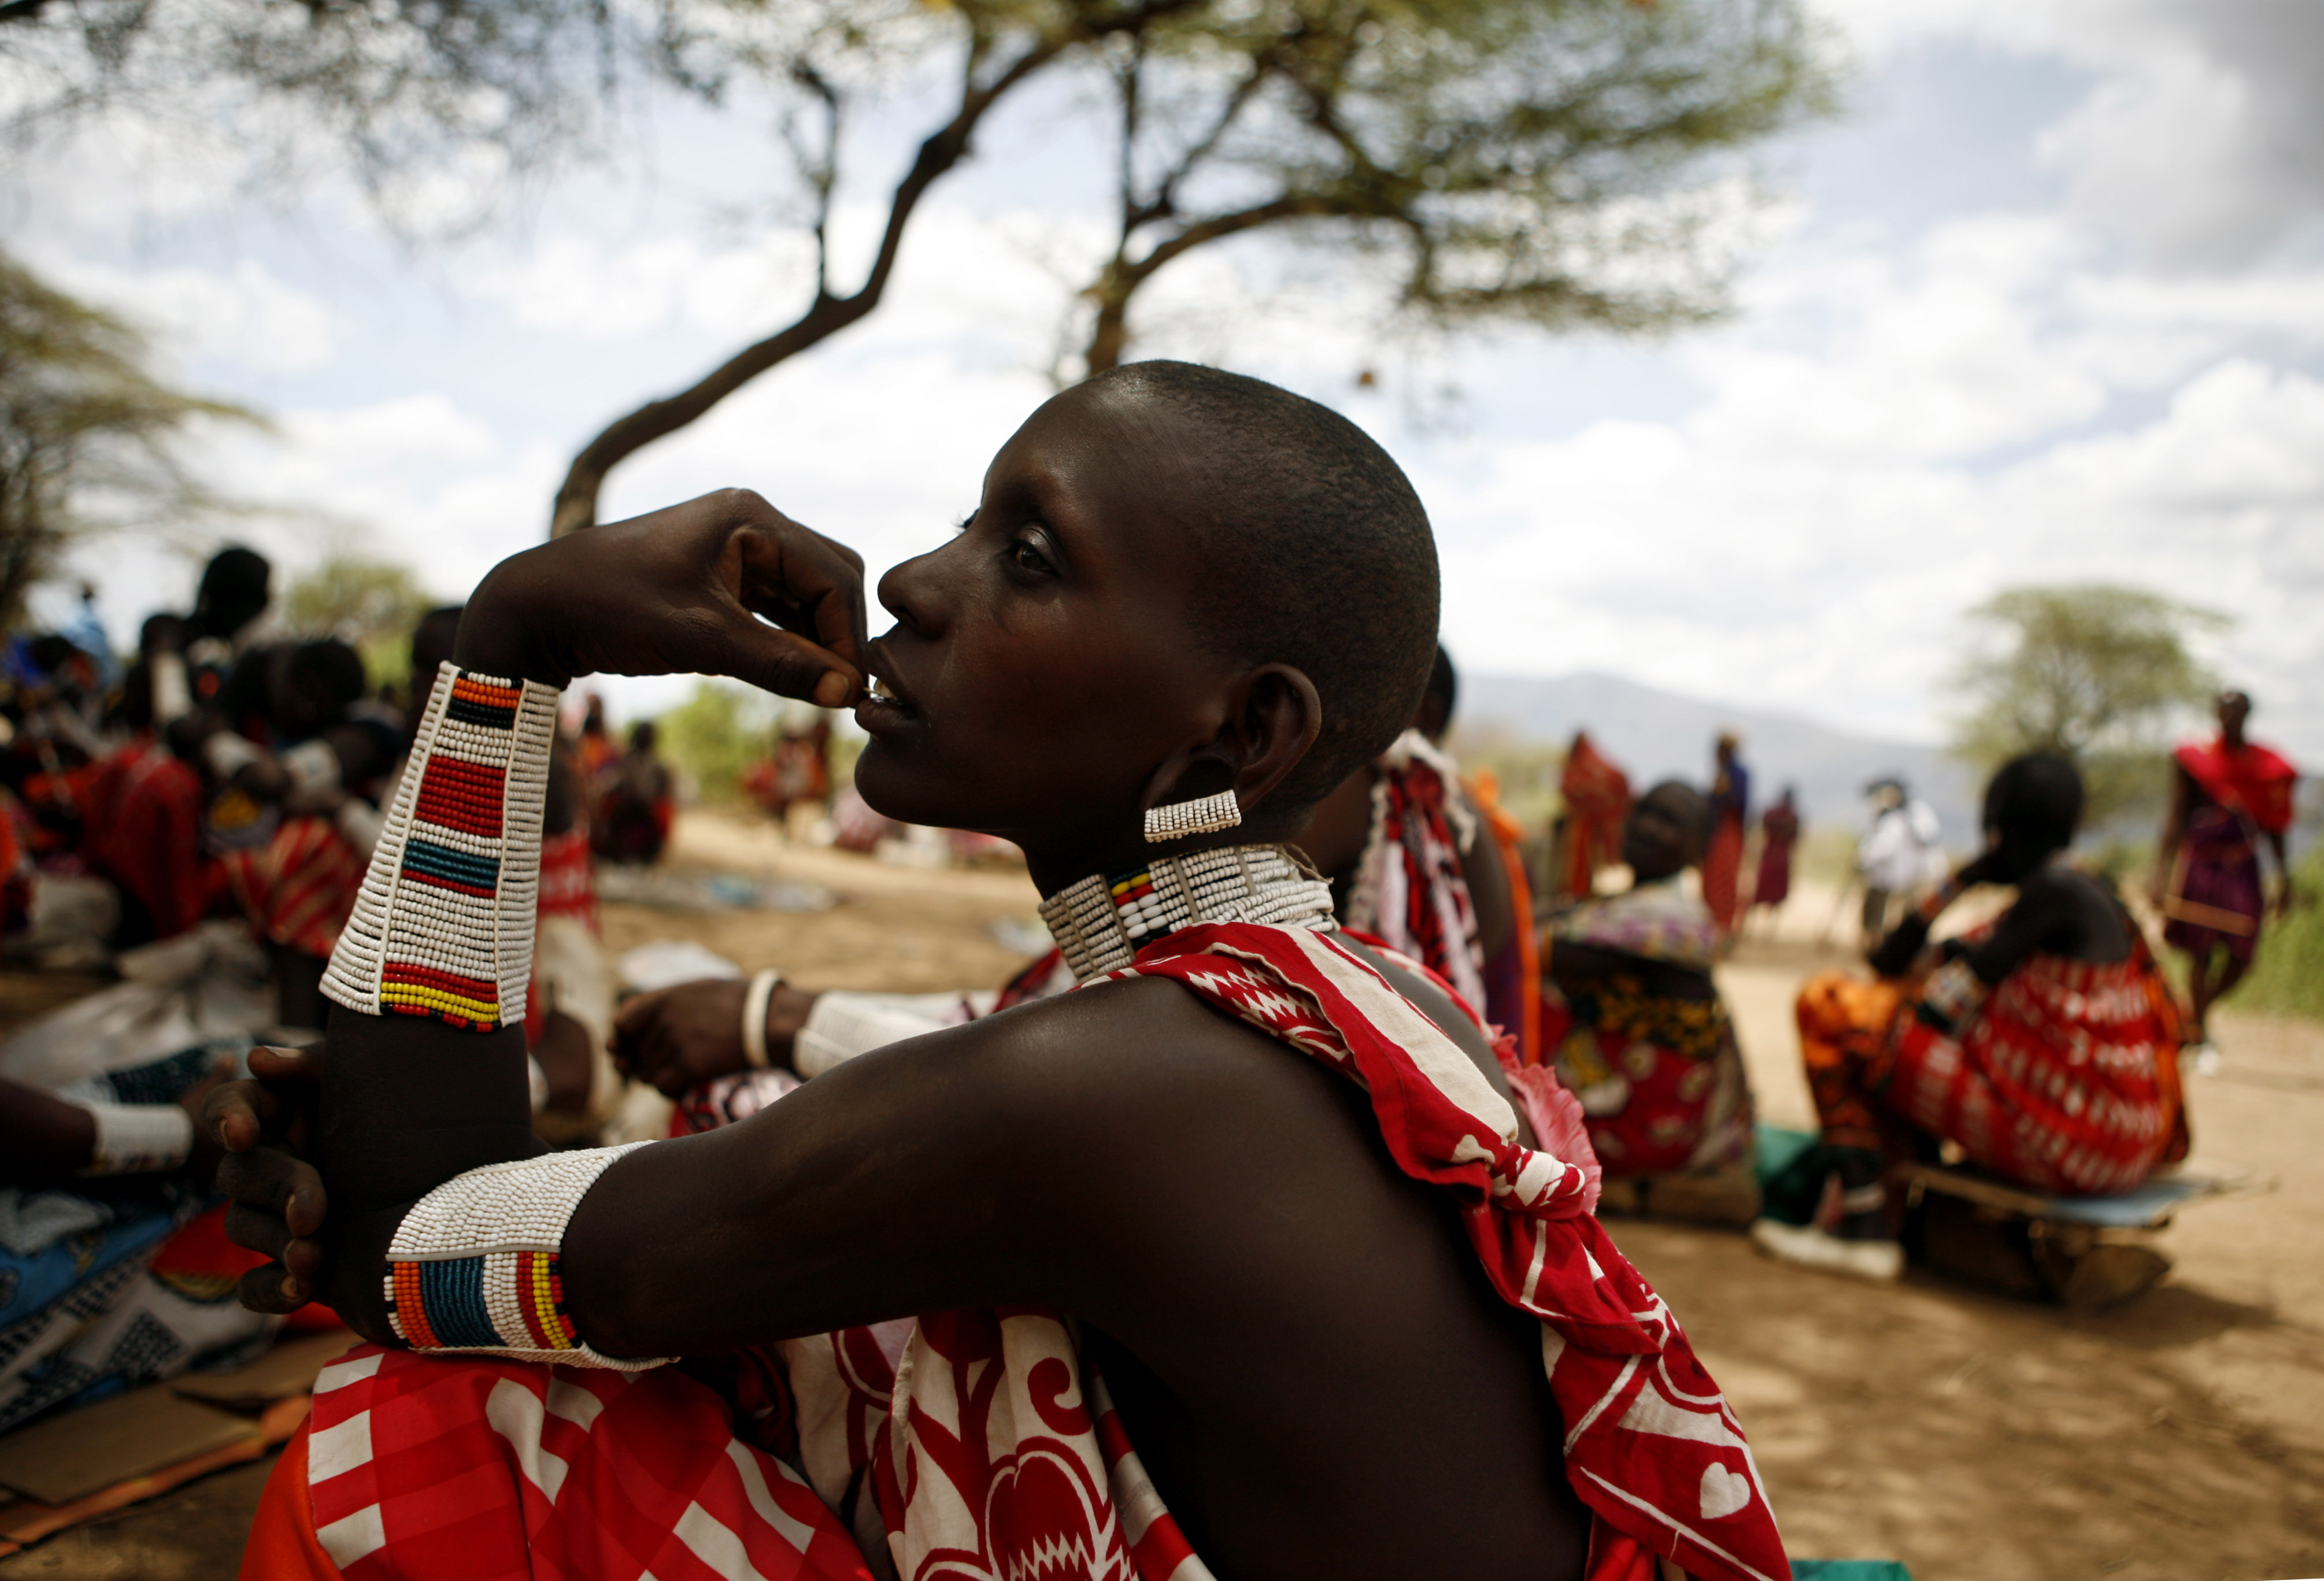 Want to Use the Maasai Name or Print? You Have to Pay for That